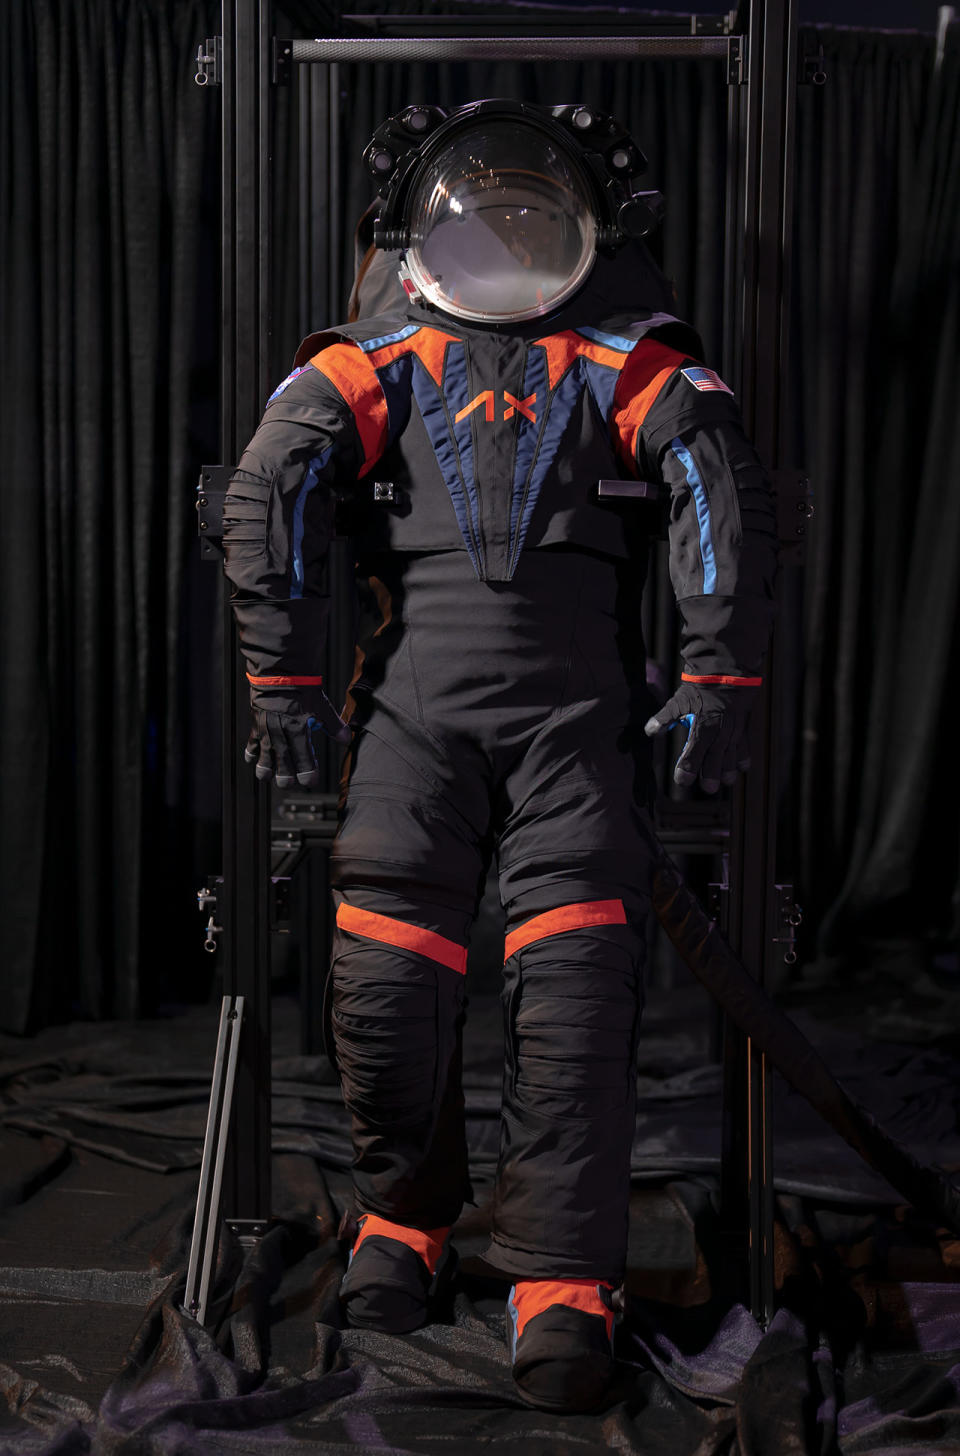 The next-generation spacesuit as designed by Axiom Space is a modular design, ready for a diverse astronaut corps.